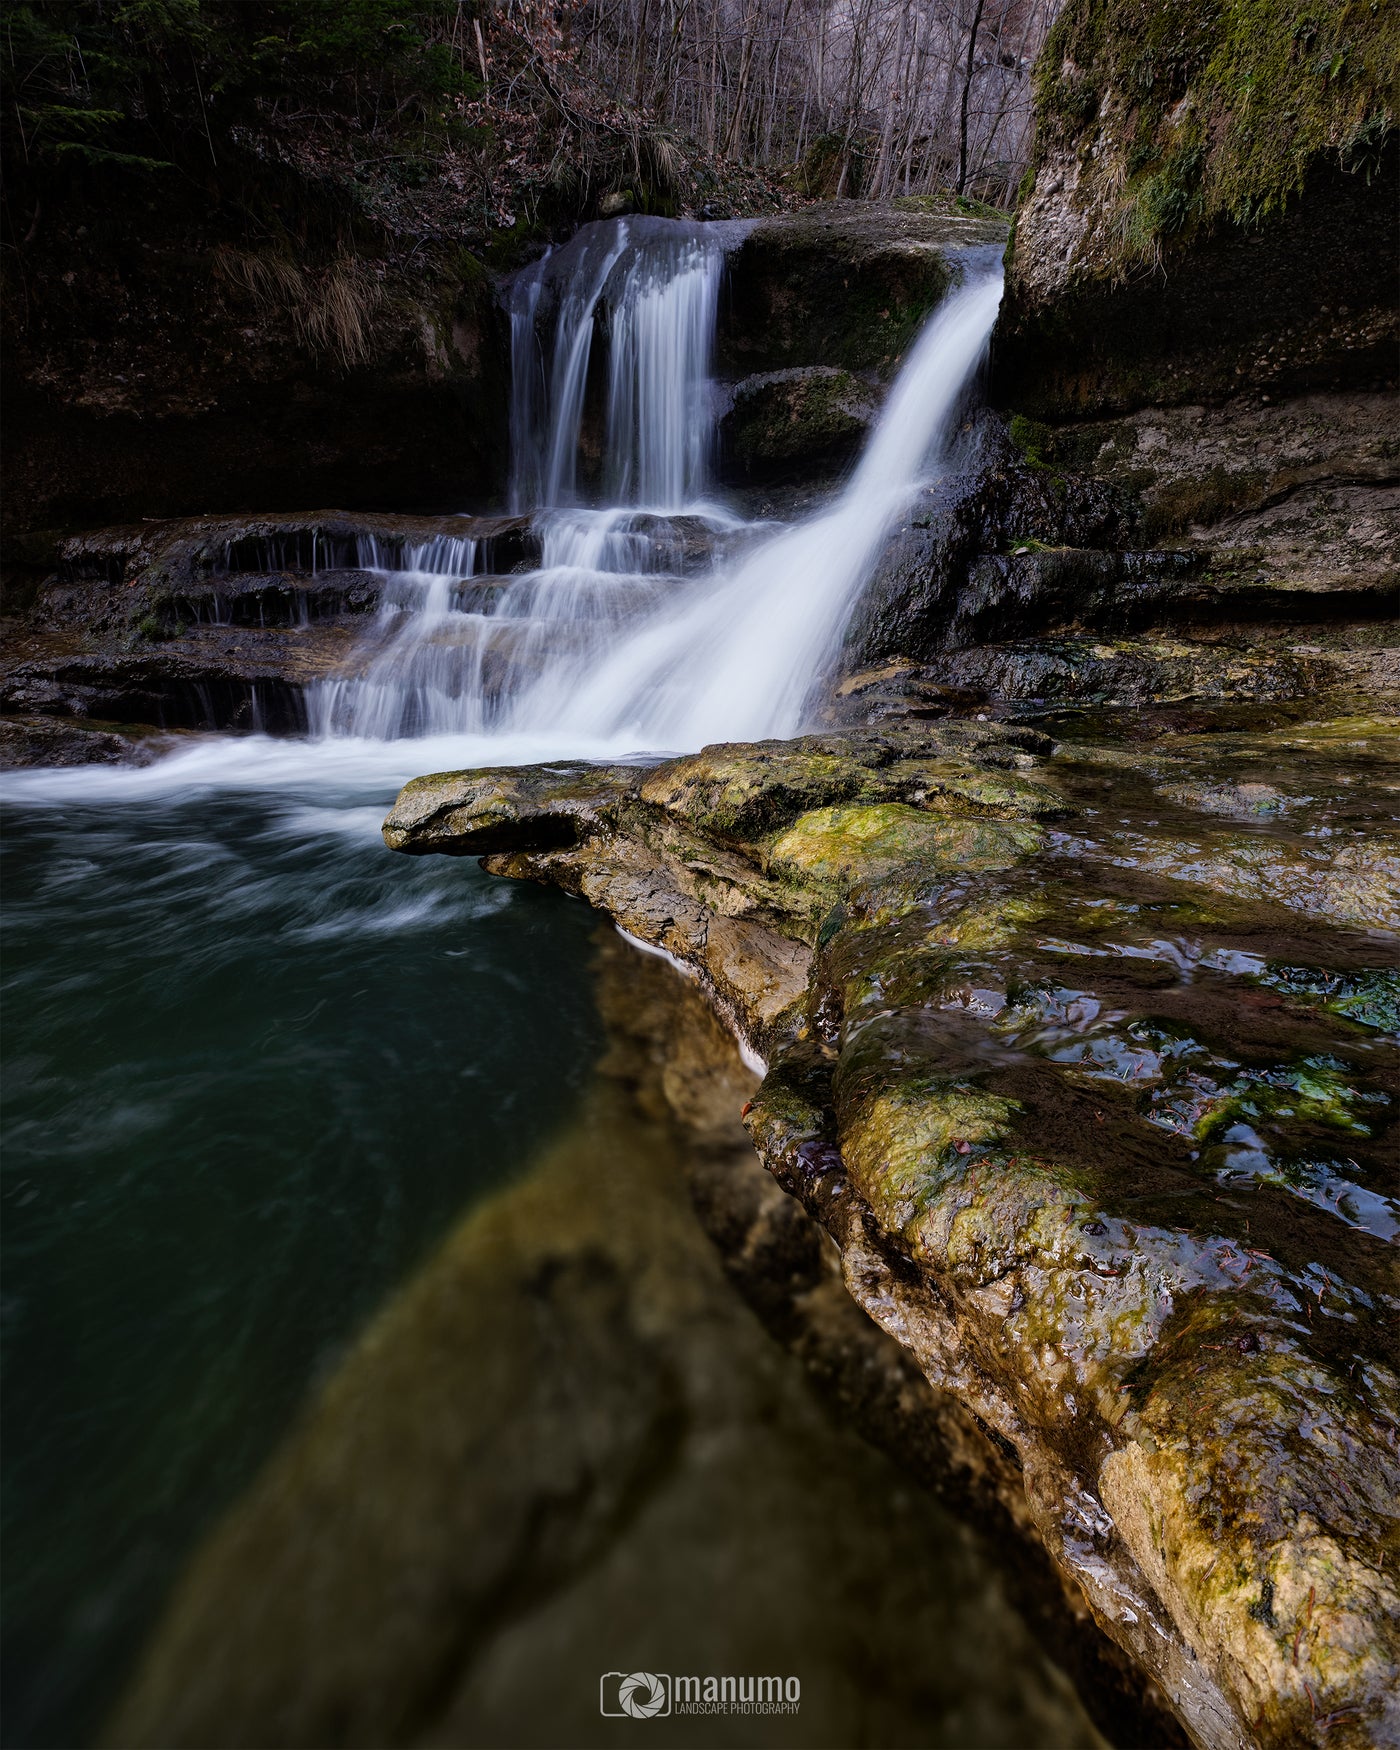 Falling Waters – Waterfall Photography Workshop | manumo-photography.